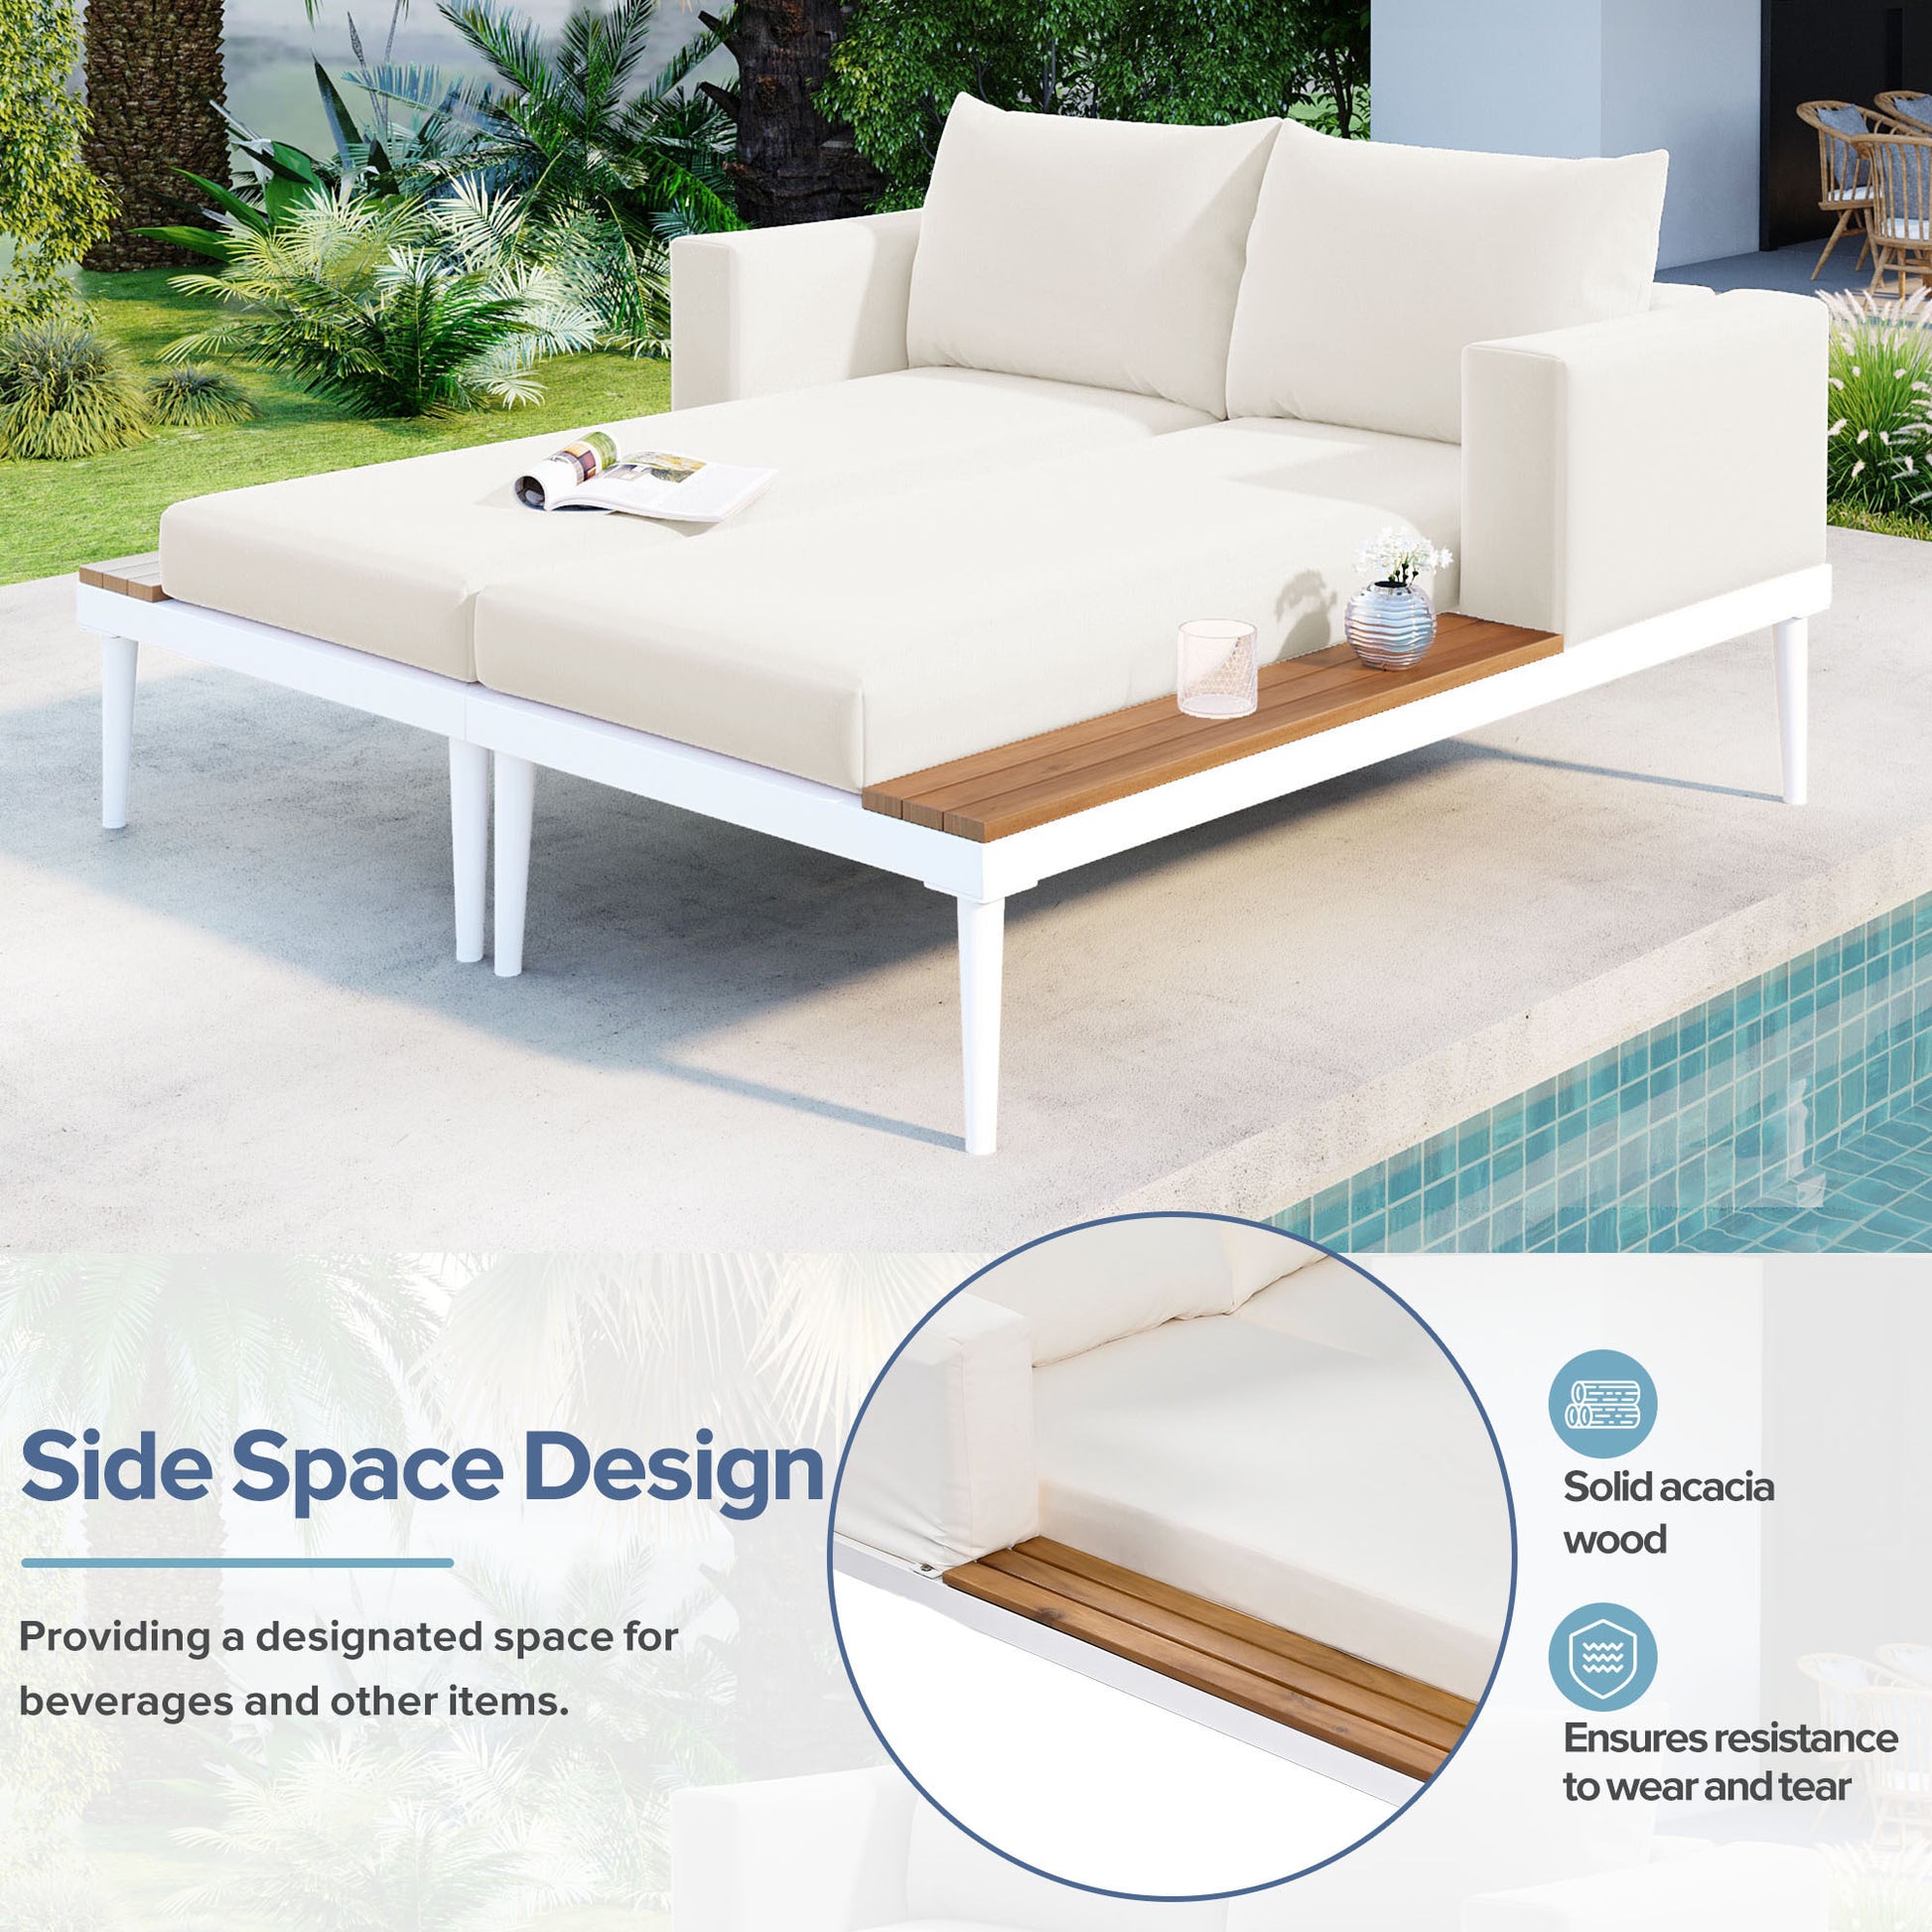 Modern Outdoor Daybed Patio Metal Daybed with Wood Topped Side Spaces for Drinks(Beige) - Ukerr Home